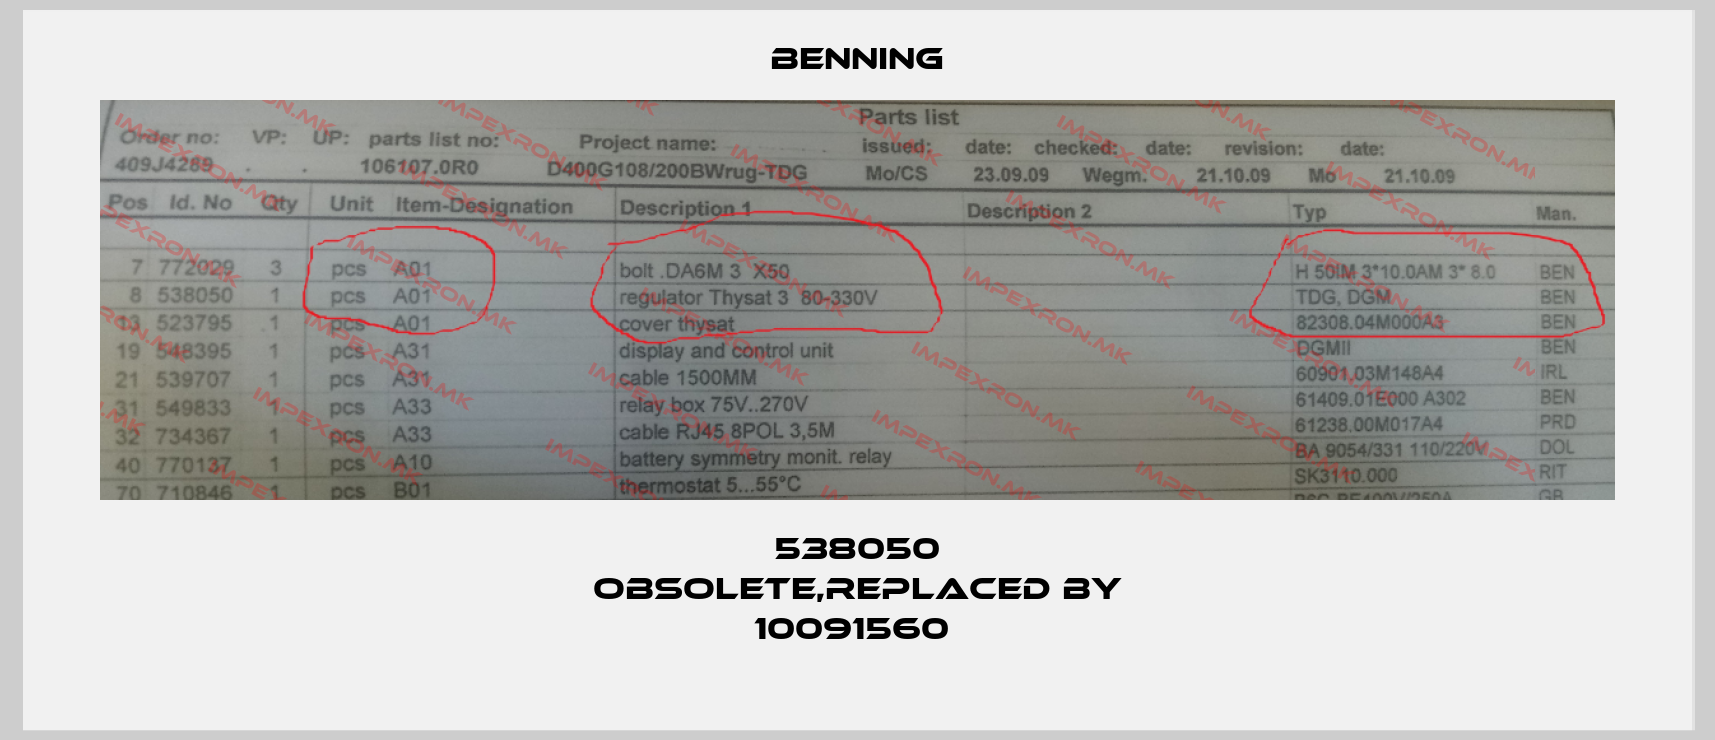 Benning-538050 obsolete,replaced by 10091560 price